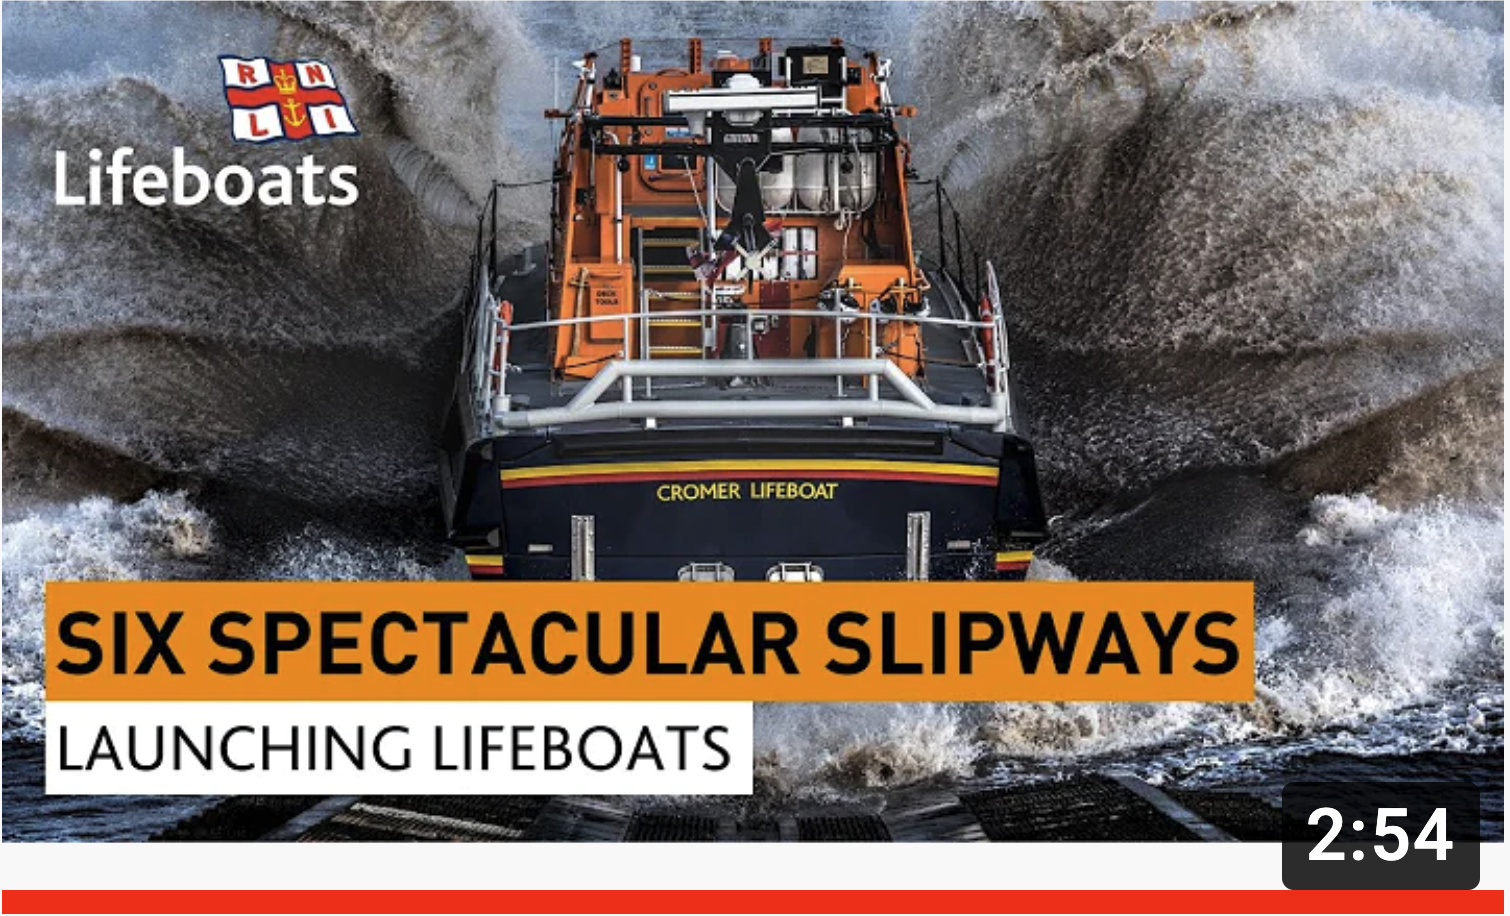  Six Spectacular Slipways - Launching Lifeboats at the RNLI